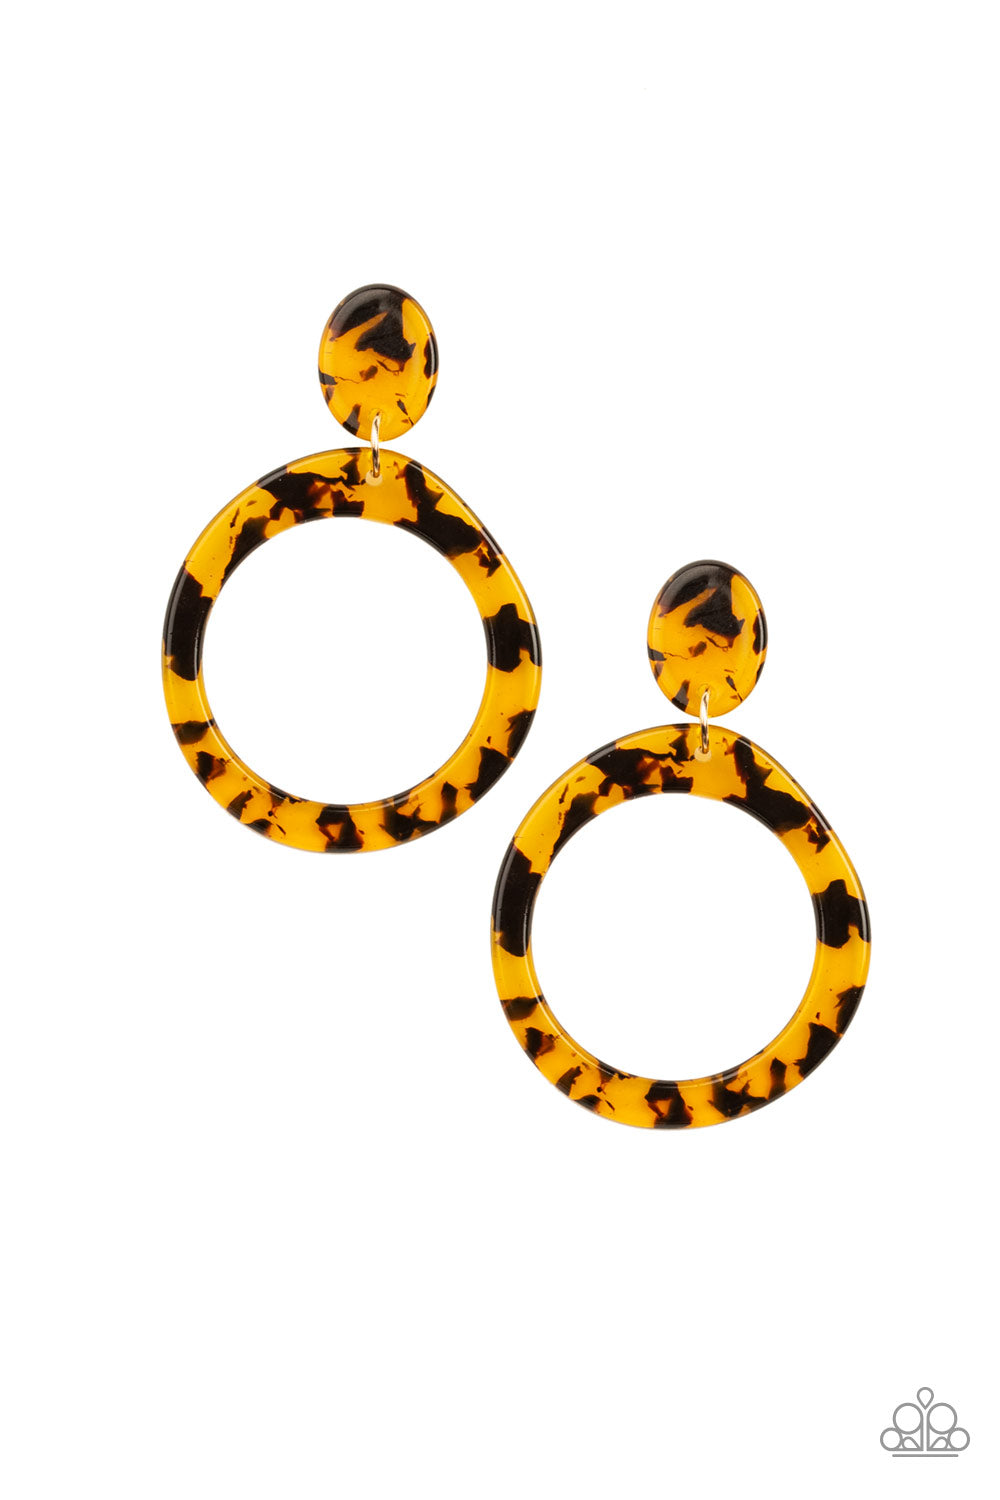 FISH OUT OF WATER - YELLOW/BLACK ACRYLIC POST EARRING